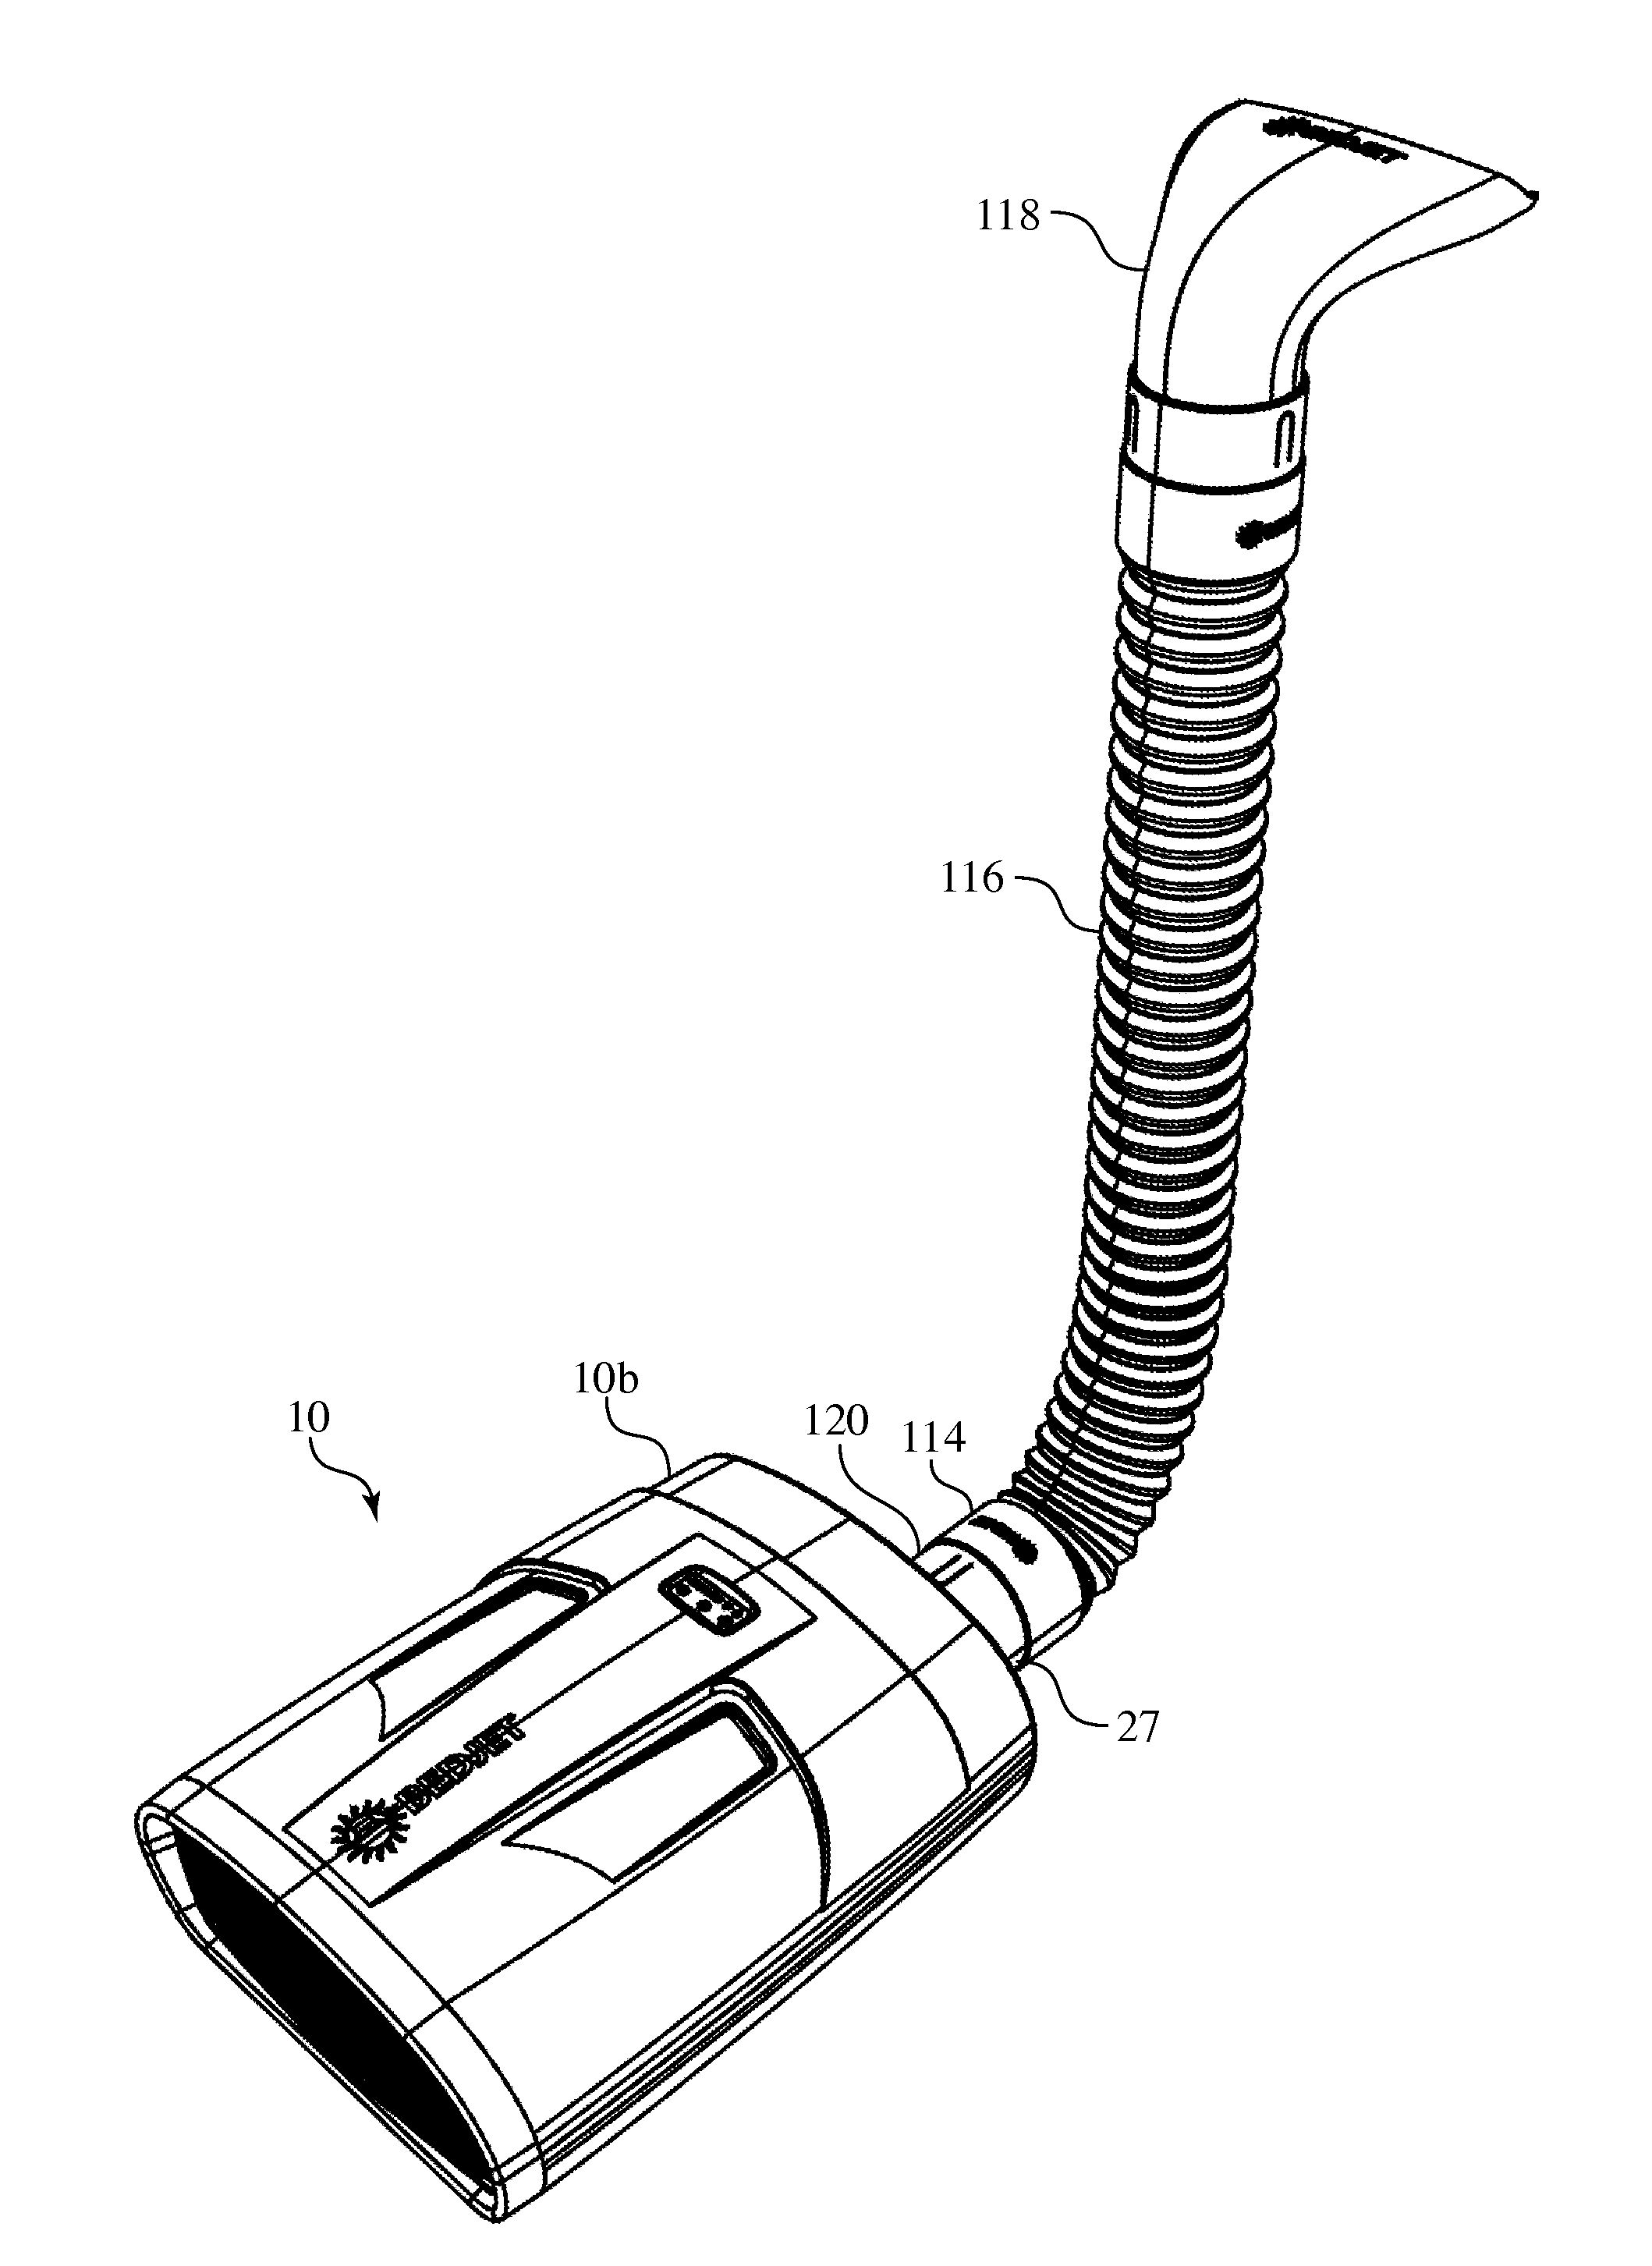 Remote operation of a bedding climate control apparatus